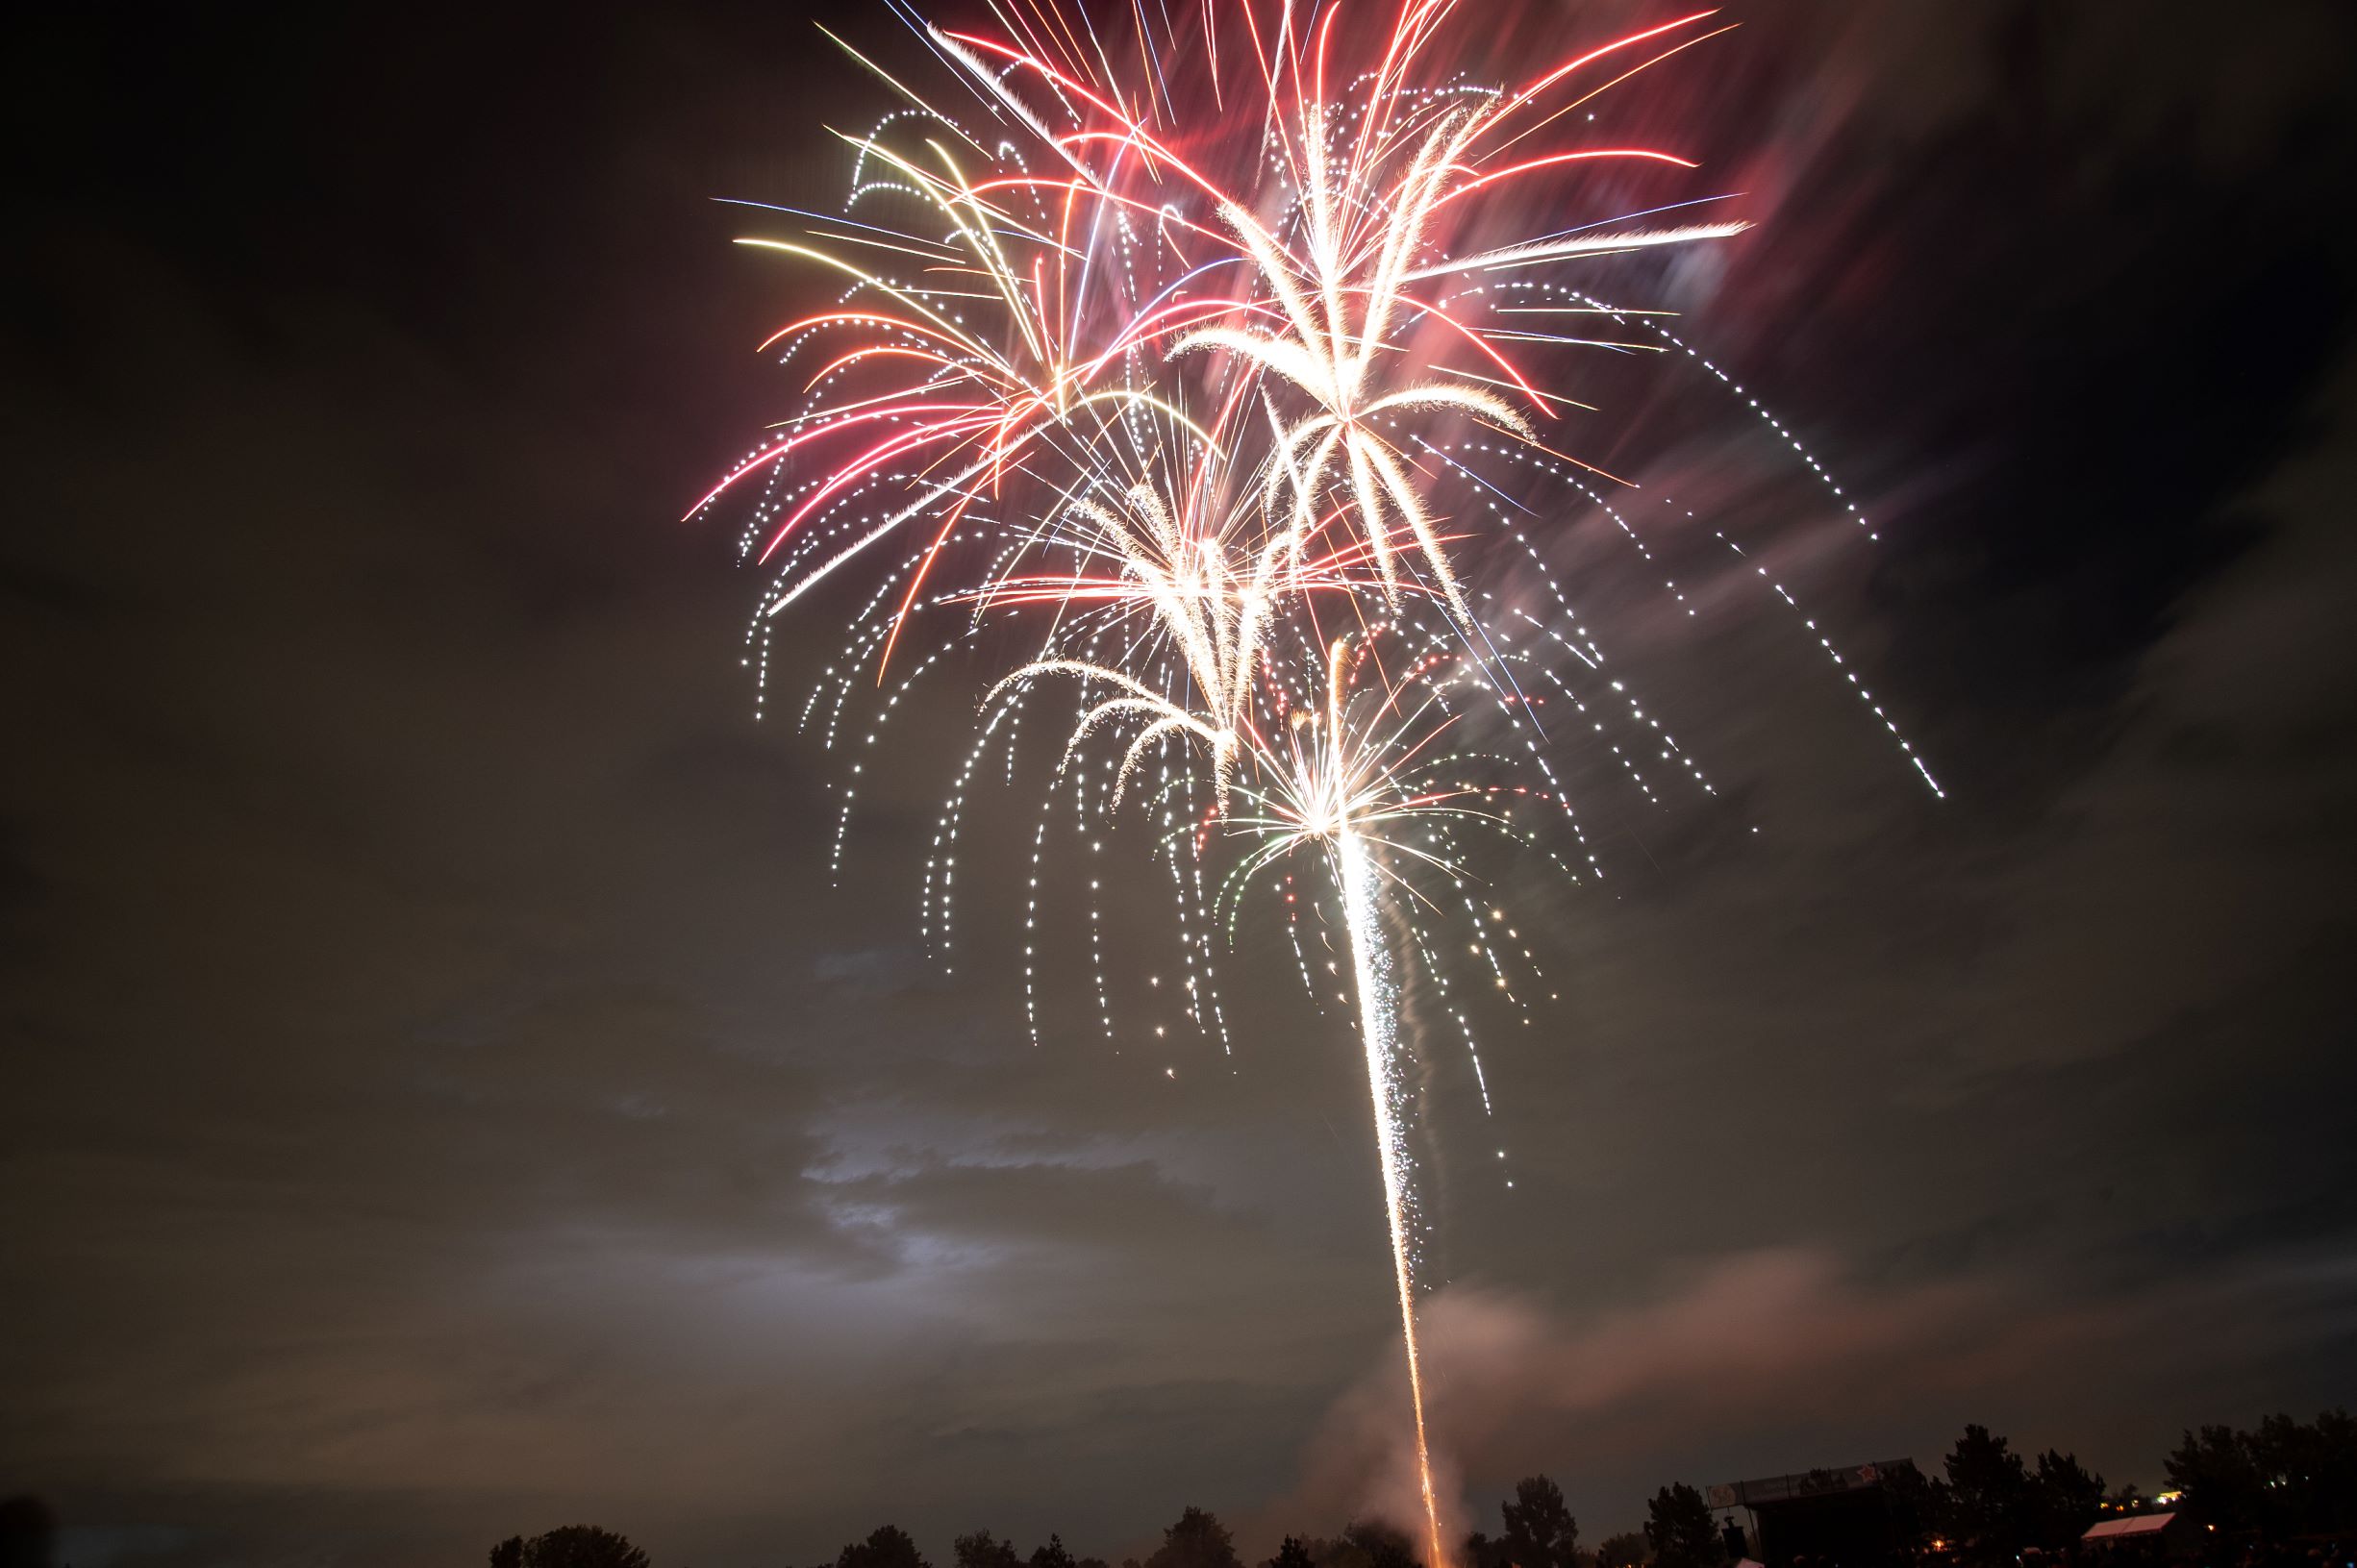 City of Lone Tree Cancels Annual Independence Day Fireworks City of